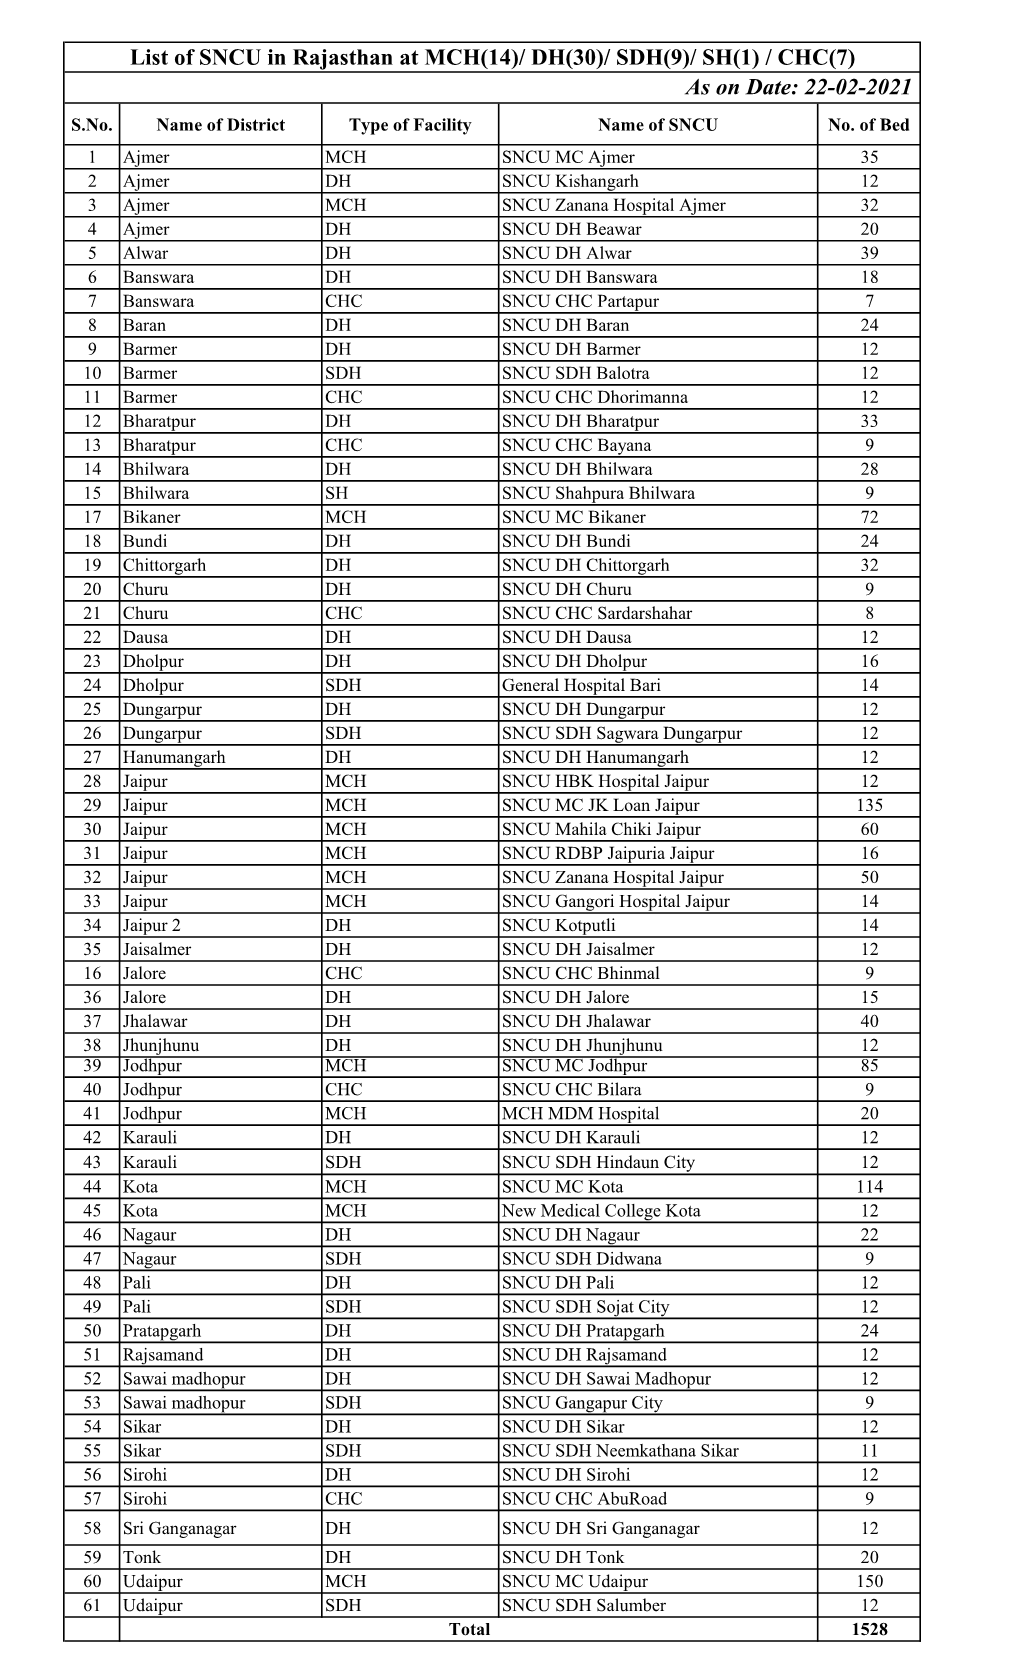 List of SNCU in Rajasthan at MCH(14)/ DH(30)/ SDH(9)/ SH(1) / CHC(7) As on Date: 22-02-2021 S.No